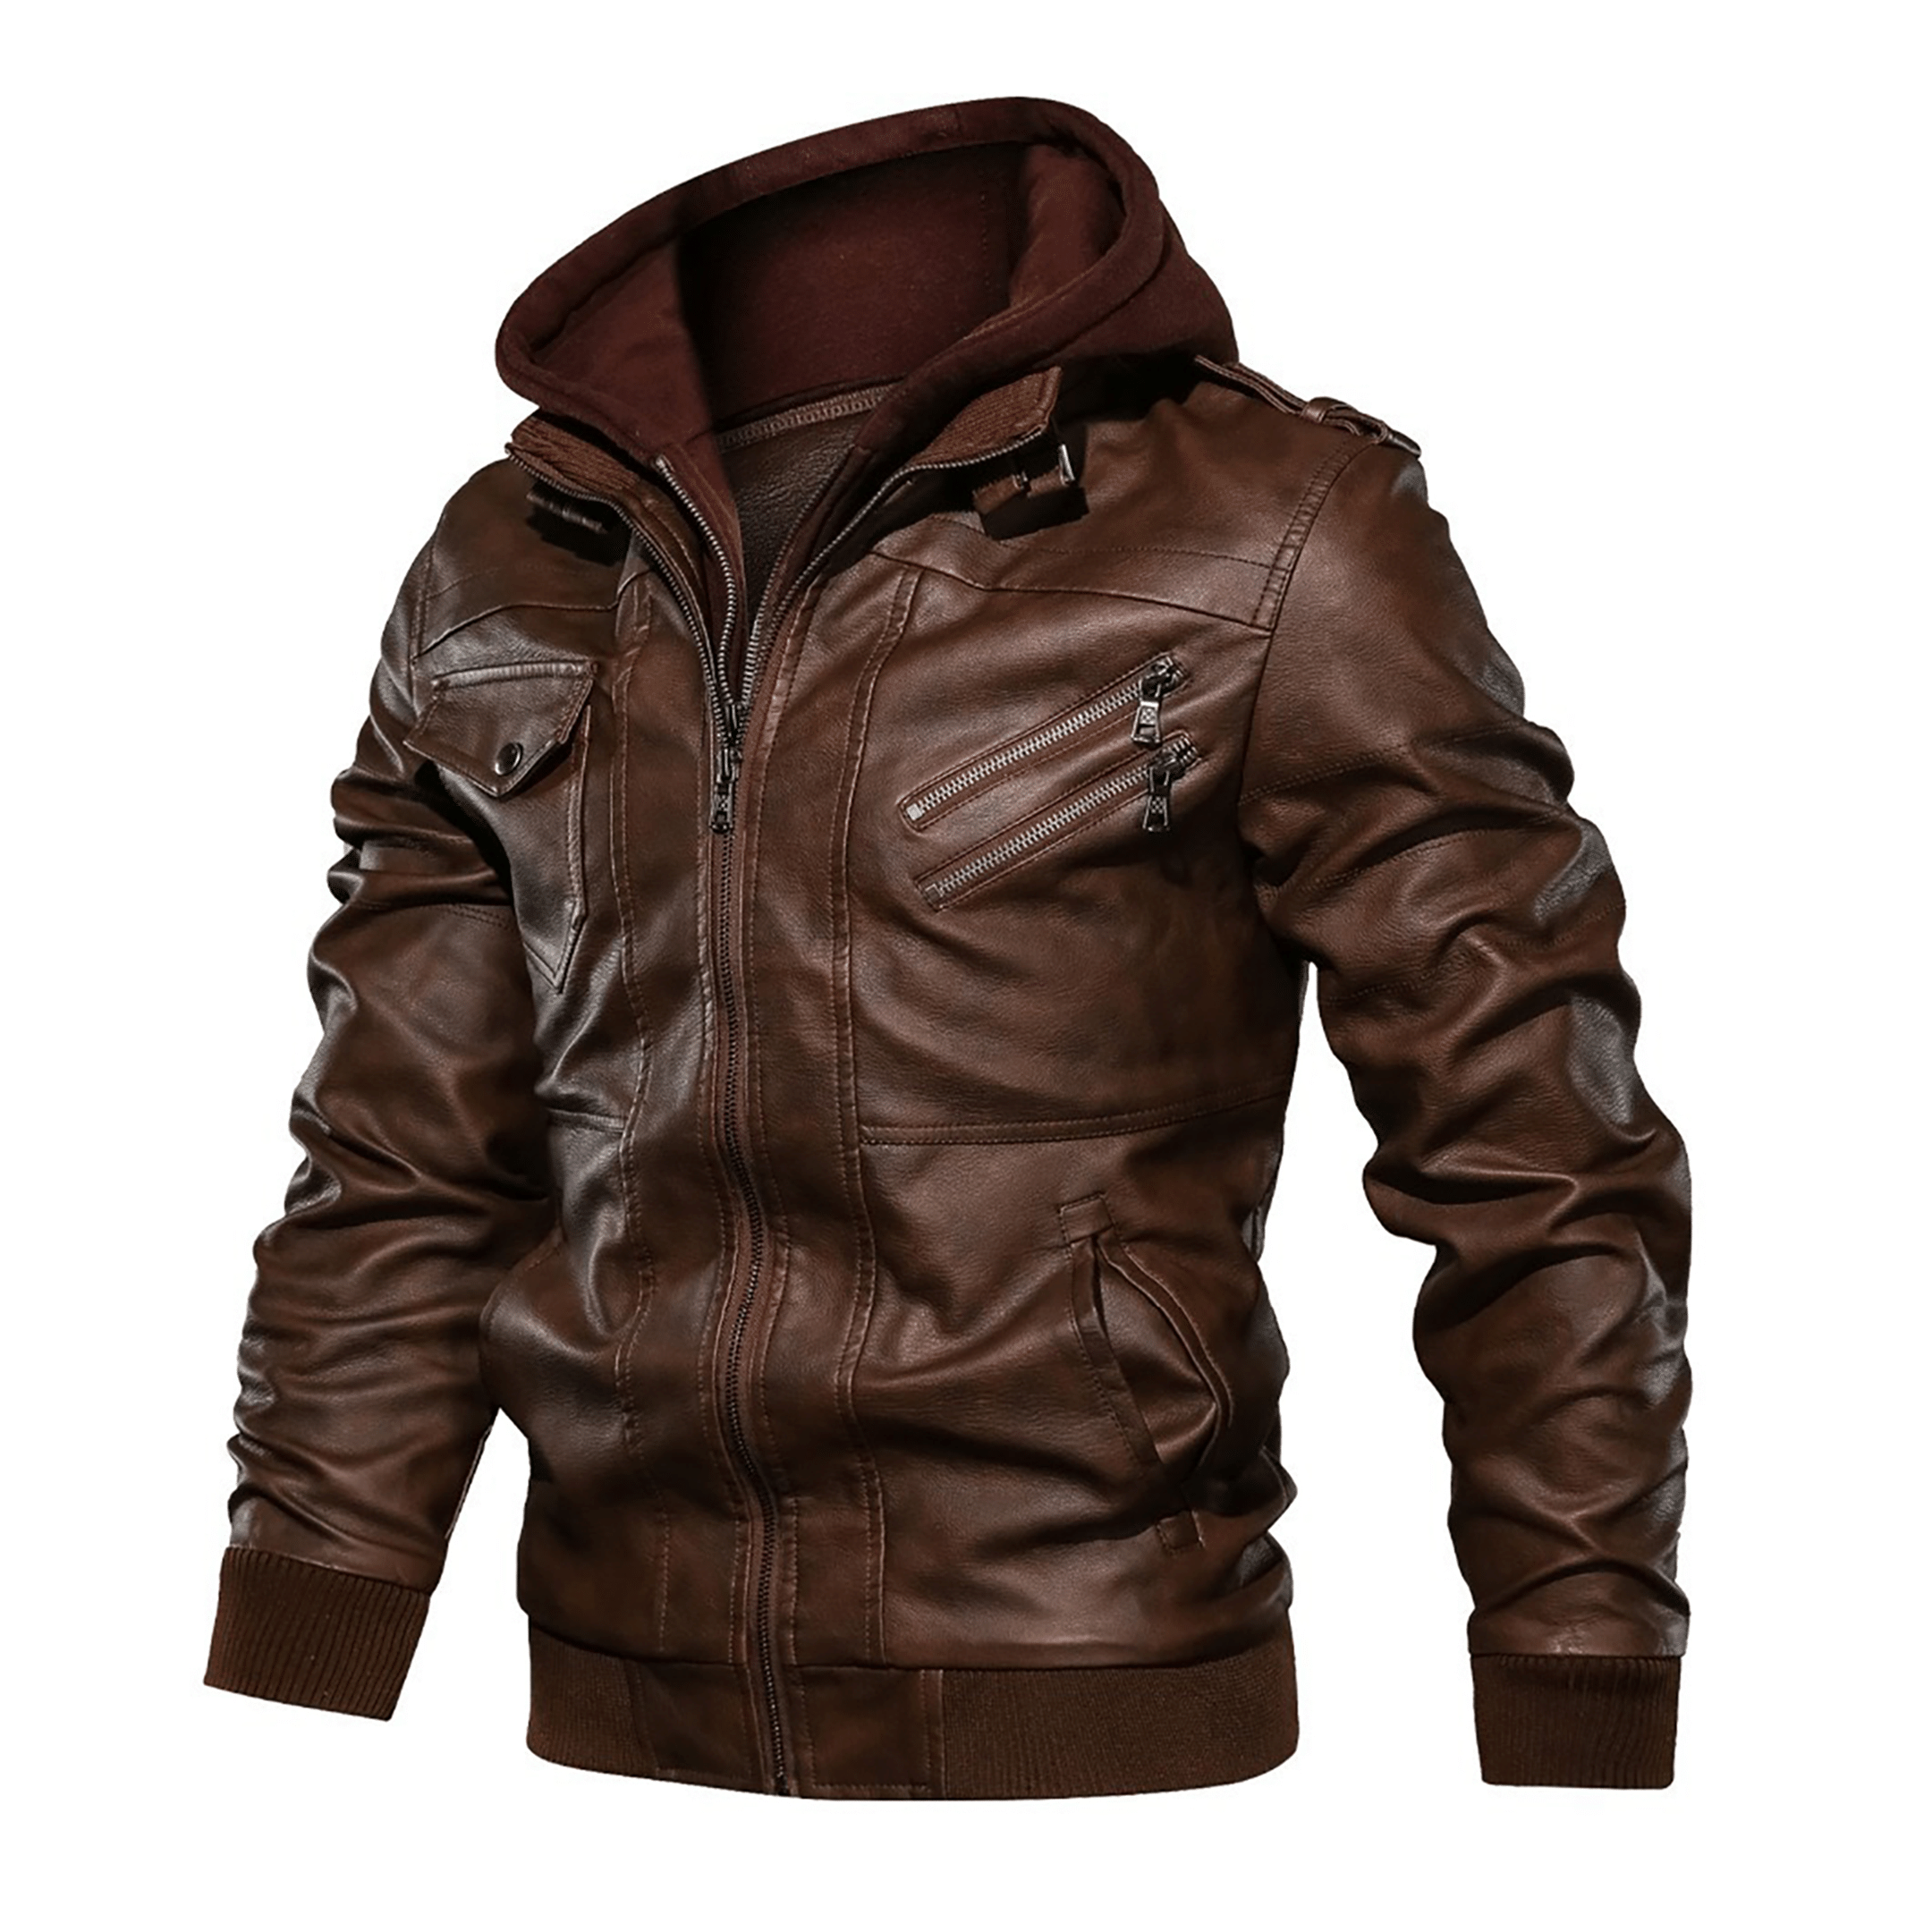 Top leather jackets and latest products 325